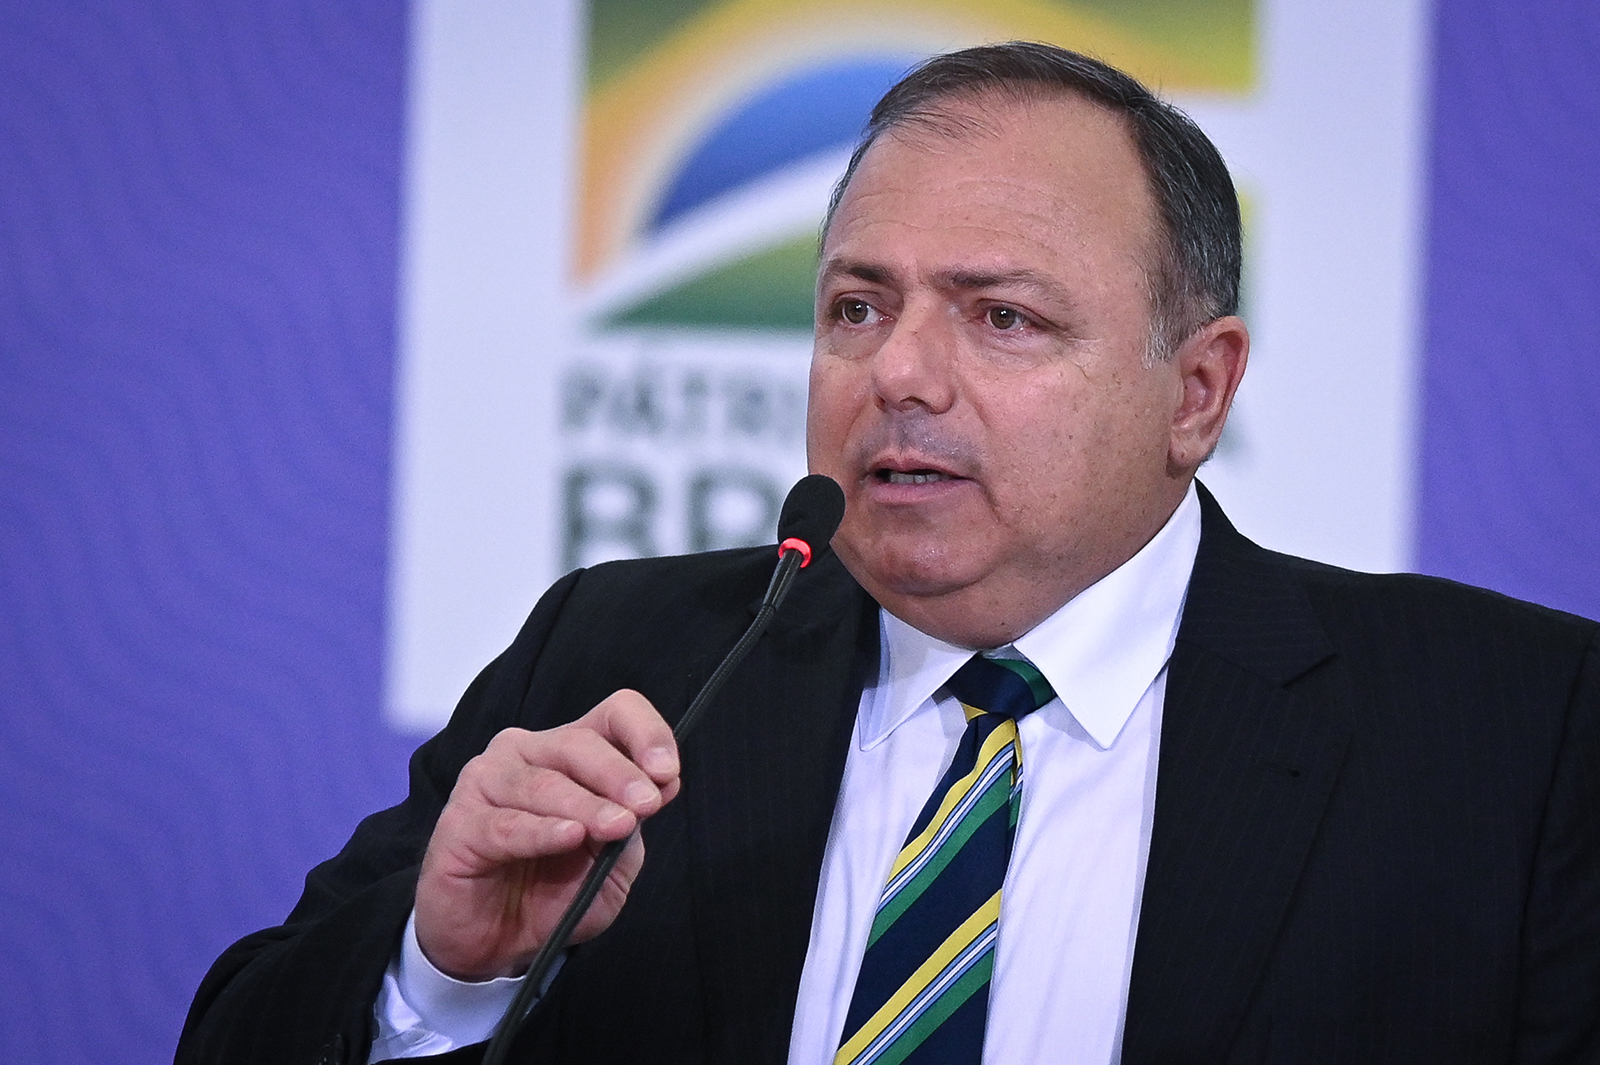 Brazil's Health Minister Eduardo Pazuello speaks during the launching ceremony of the National Vaccination Operationalization Plan against Covid-19 at Planalto Palace in Brasilia, Brazil, on December 16, 2020.